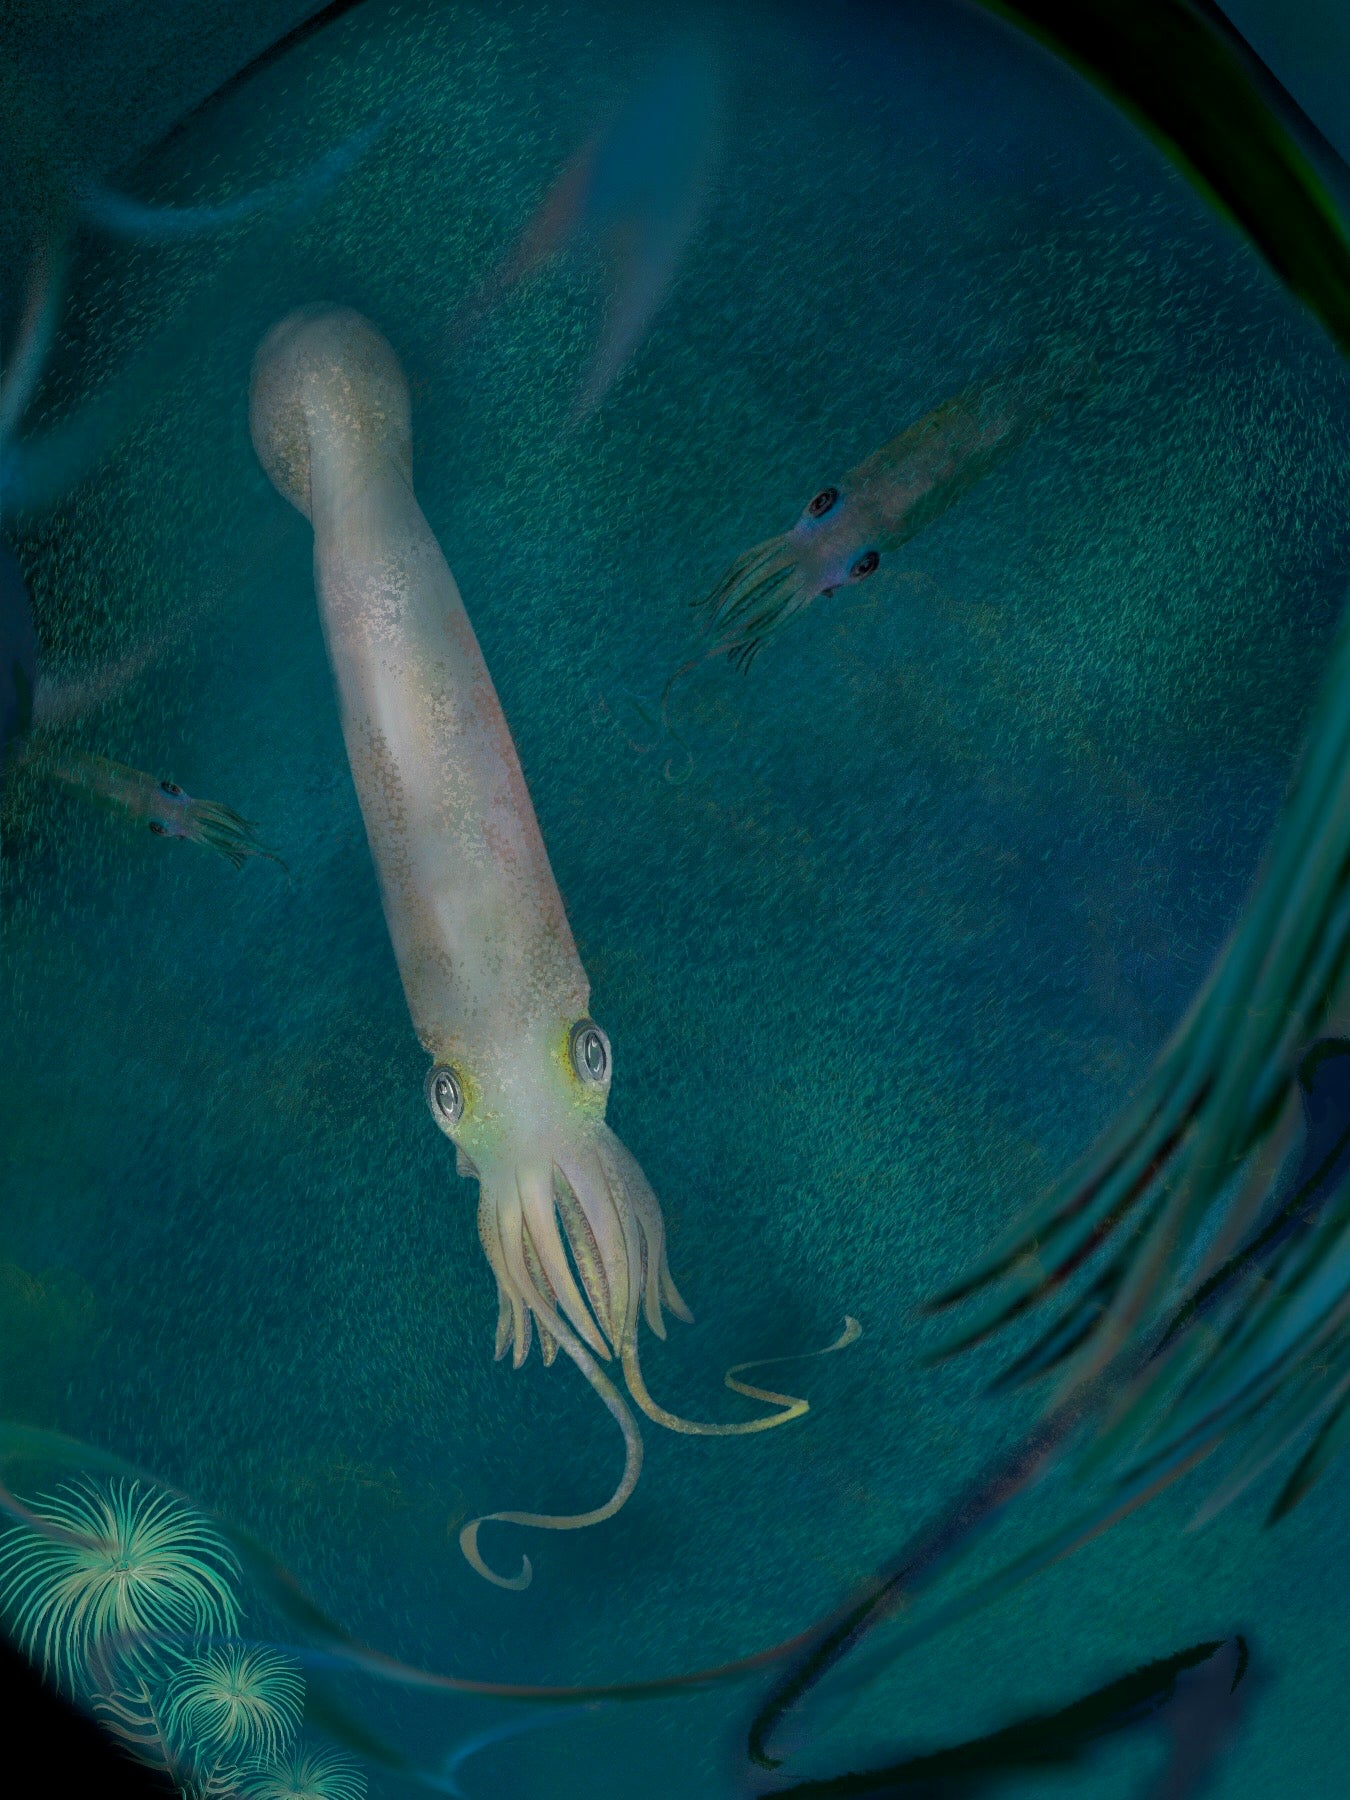 An artist's conception of S. bideni in life, with two longer arms and eight stubbier ones. (Illustration: © K. Whalen)